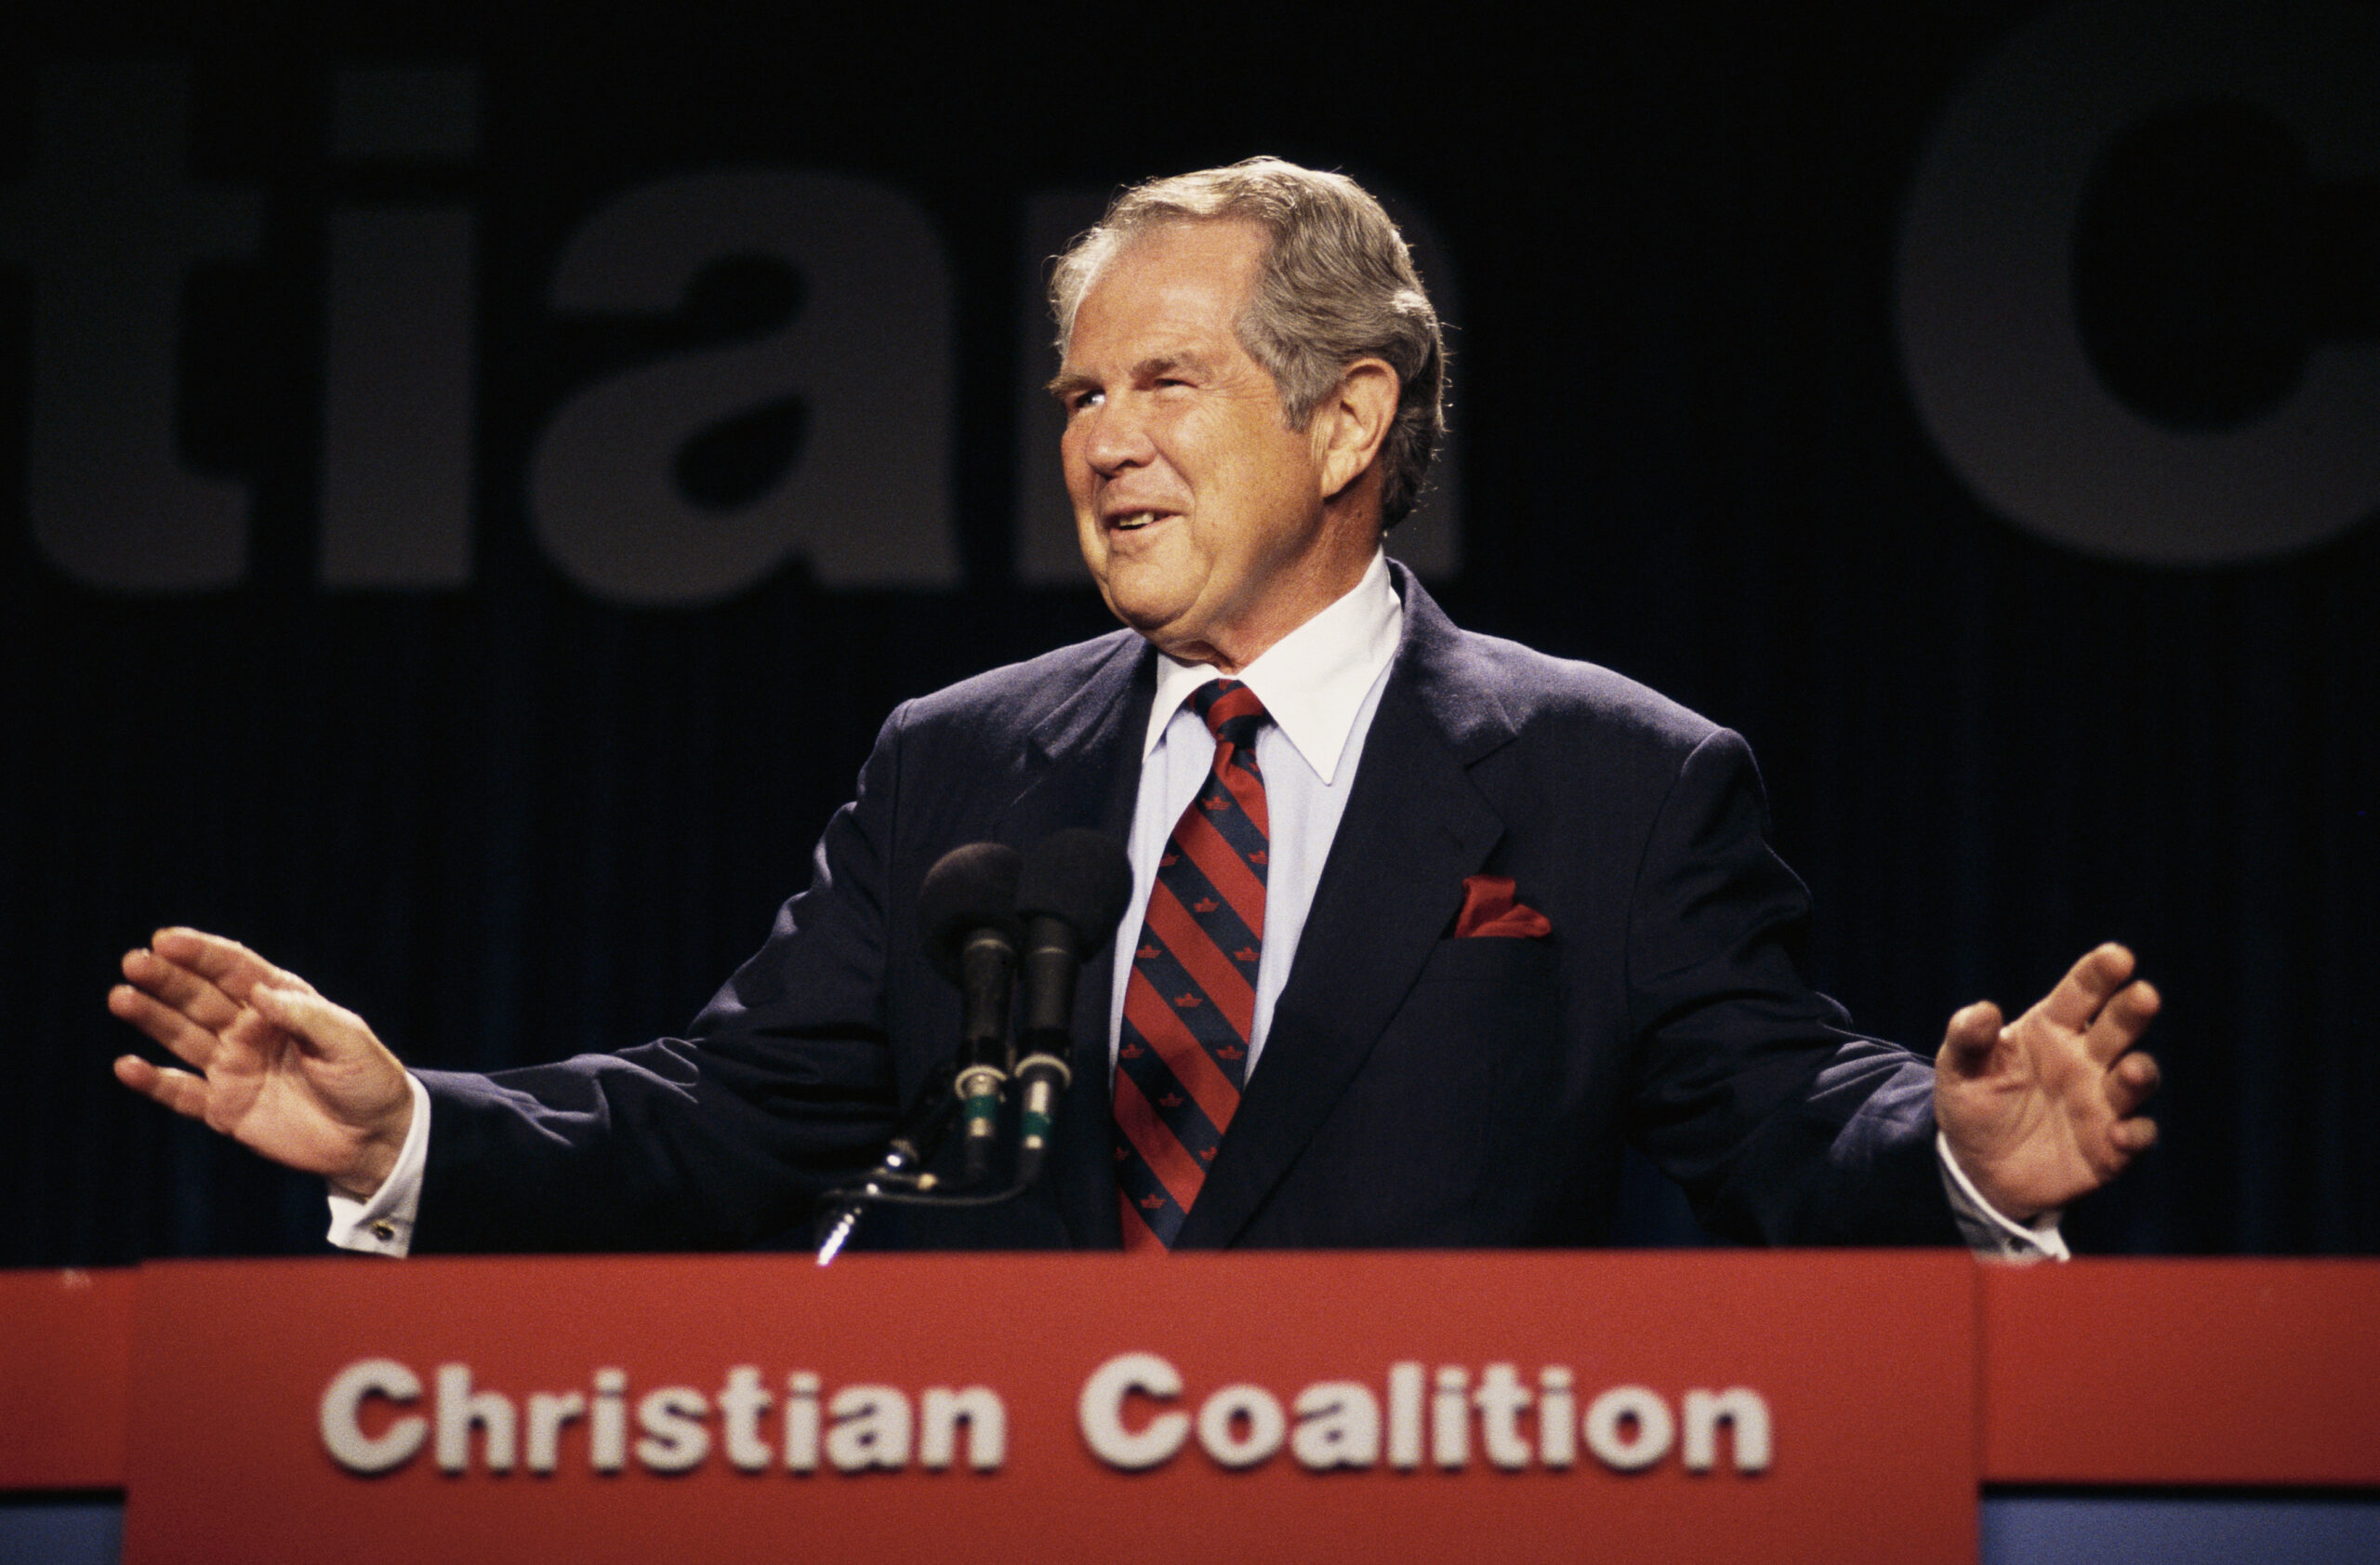 Rev. Pat Robertson, renowned evangelist and former presidential candidate, passes away at 93.